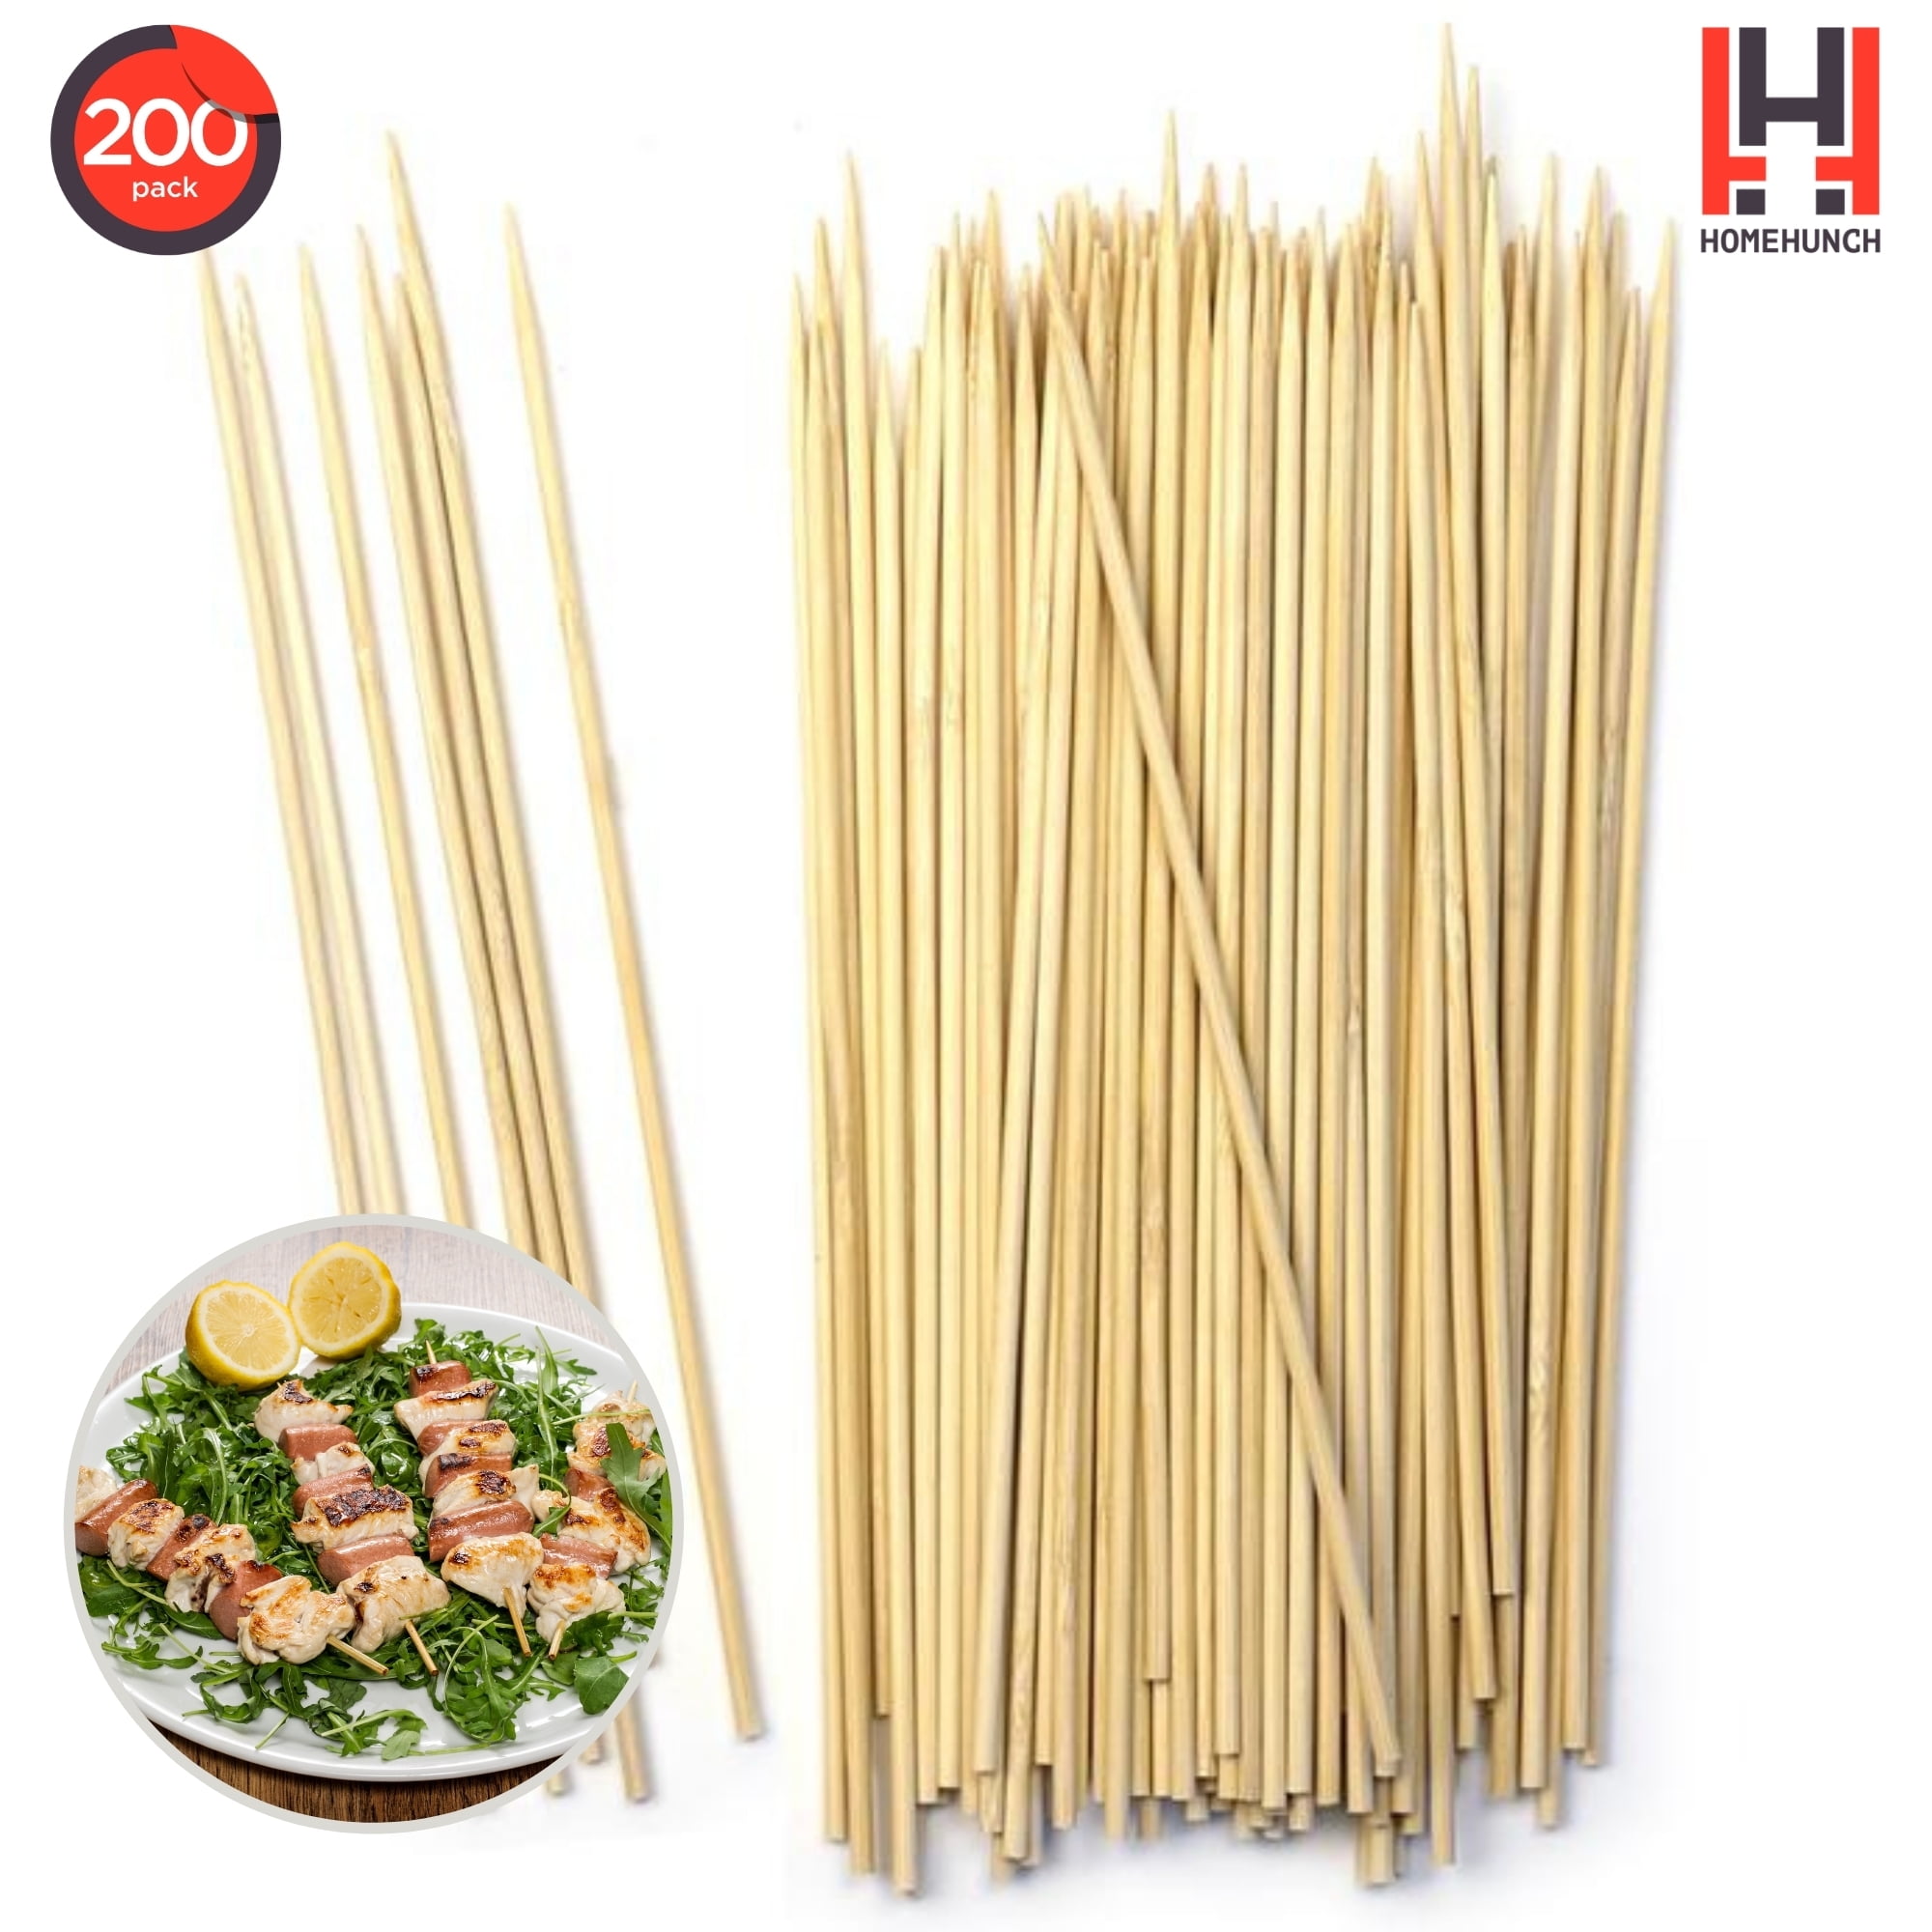 3 boxes of Disposable Wooden Skewers 7 Inch Pack of 200 Kebab sticks 